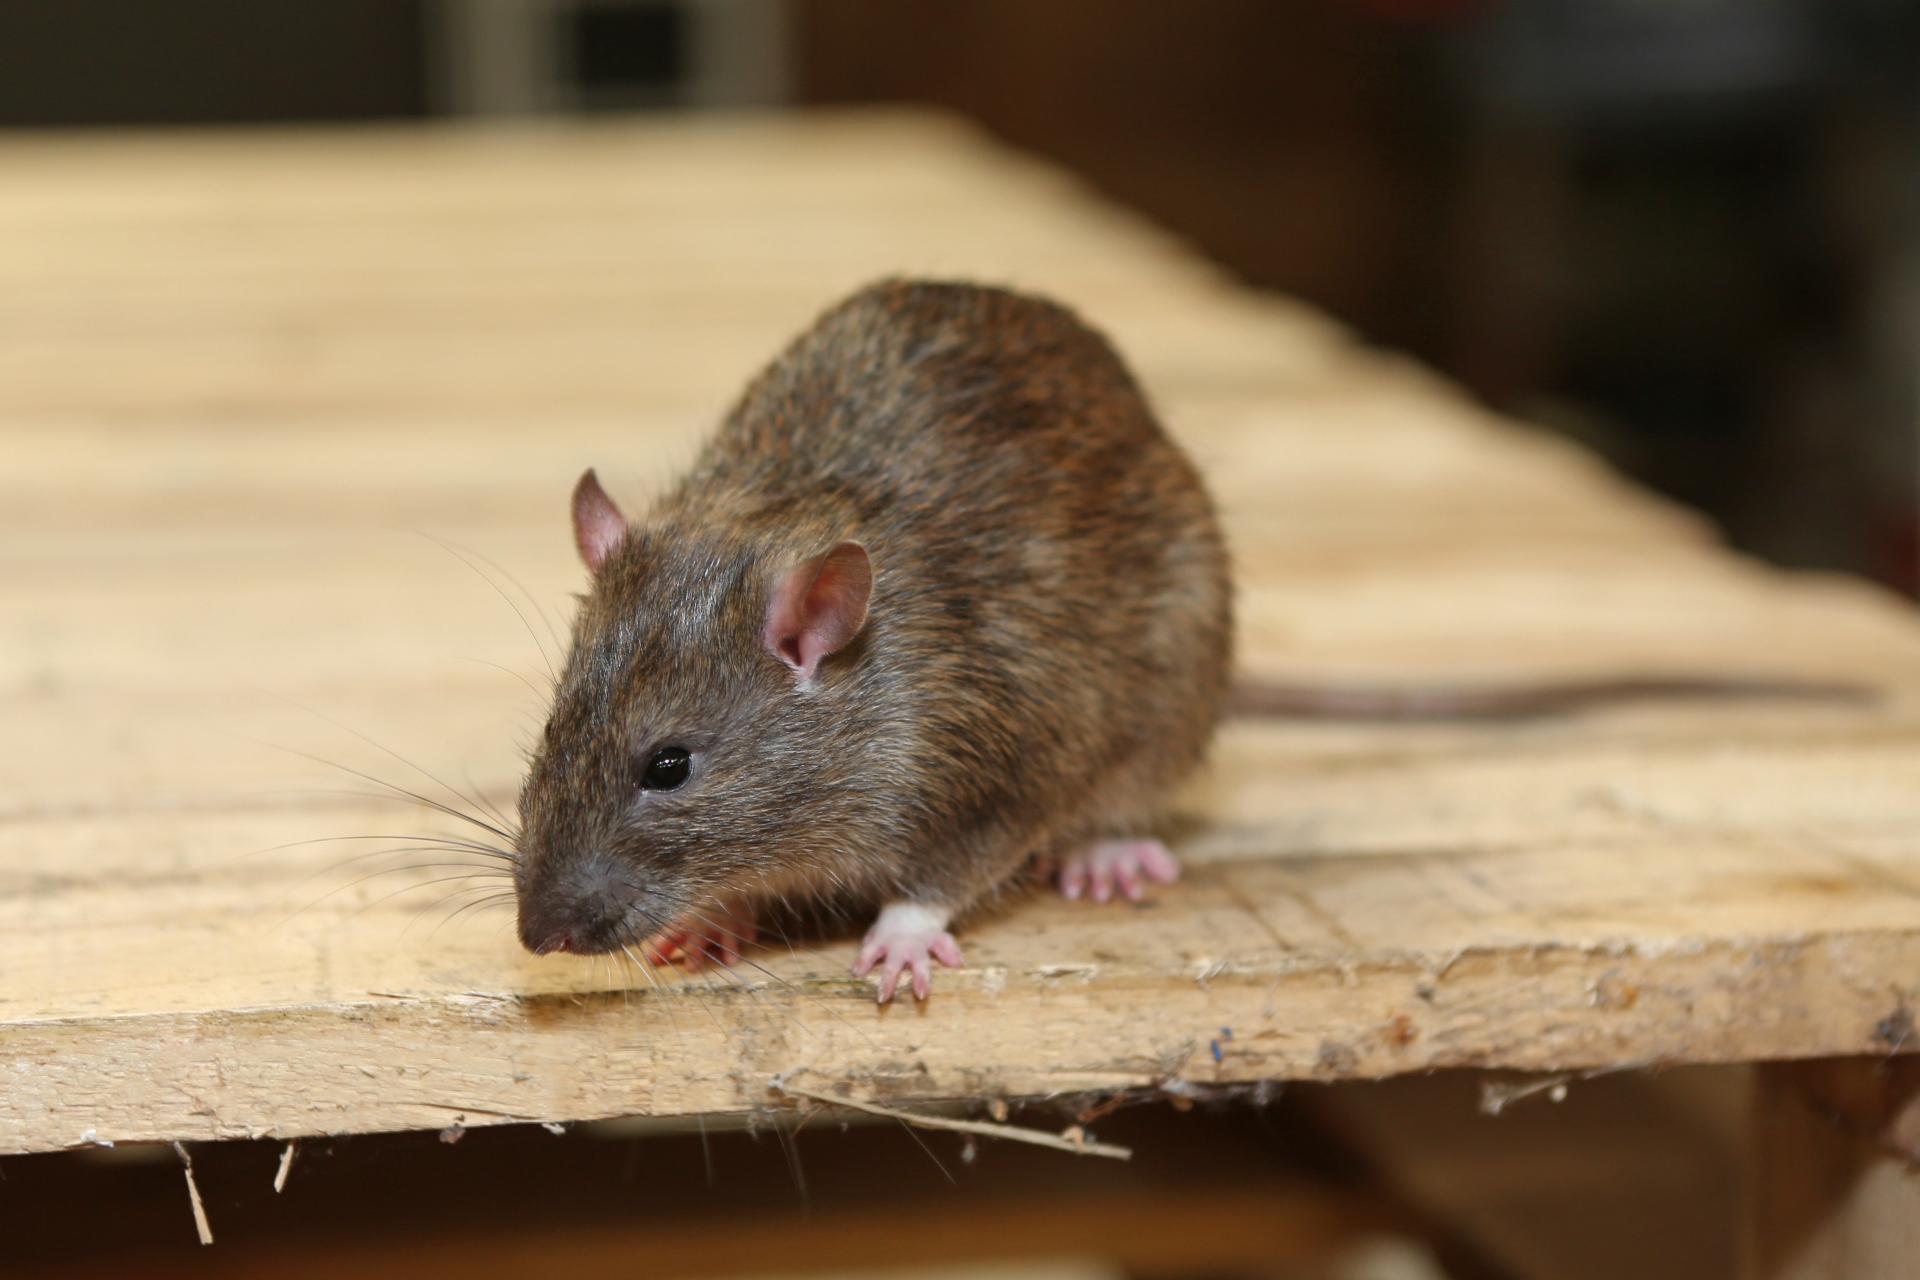 Rat Infestation, Pest Control in Clapham, SW4. Call Now 020 8166 9746